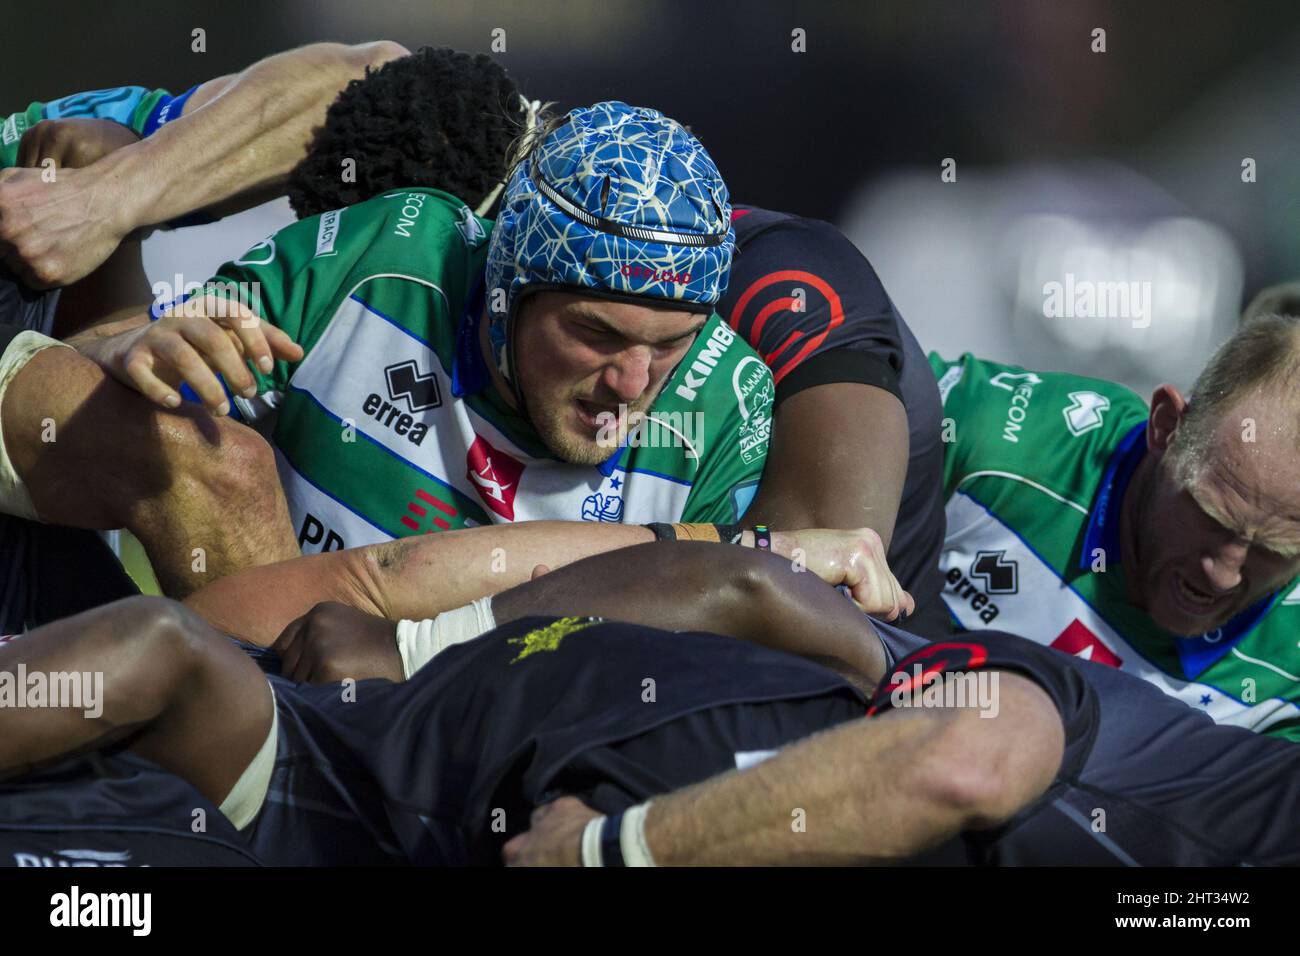 Treviso, Italy. 26th Feb, 2022. Matteo Meggiato during Benetton Rugby vs  Cell C Sharks, United Rugby Championship match in Treviso, Italy, febbraio  26 2022 Credit: Independent Photo Agency/Alamy Live News Stock Photo - Alamy